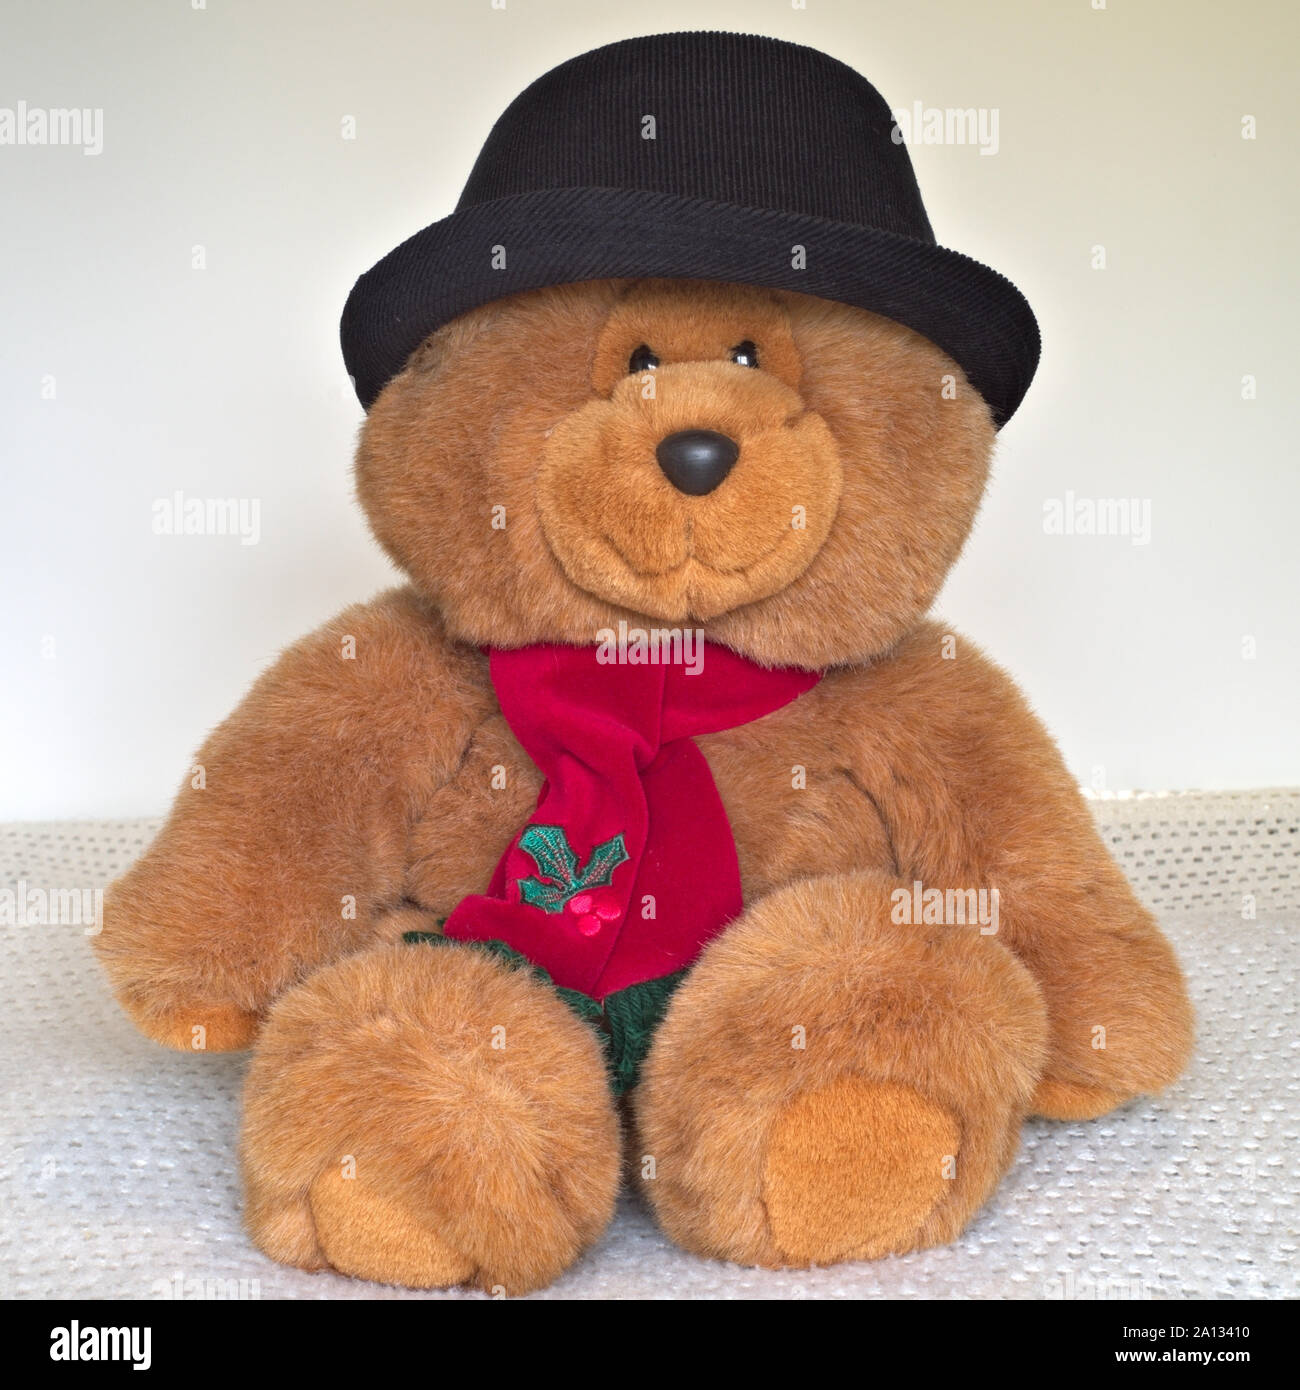 Teddy Bear Wearing a Black Hat and Red Scarf Stock Photo